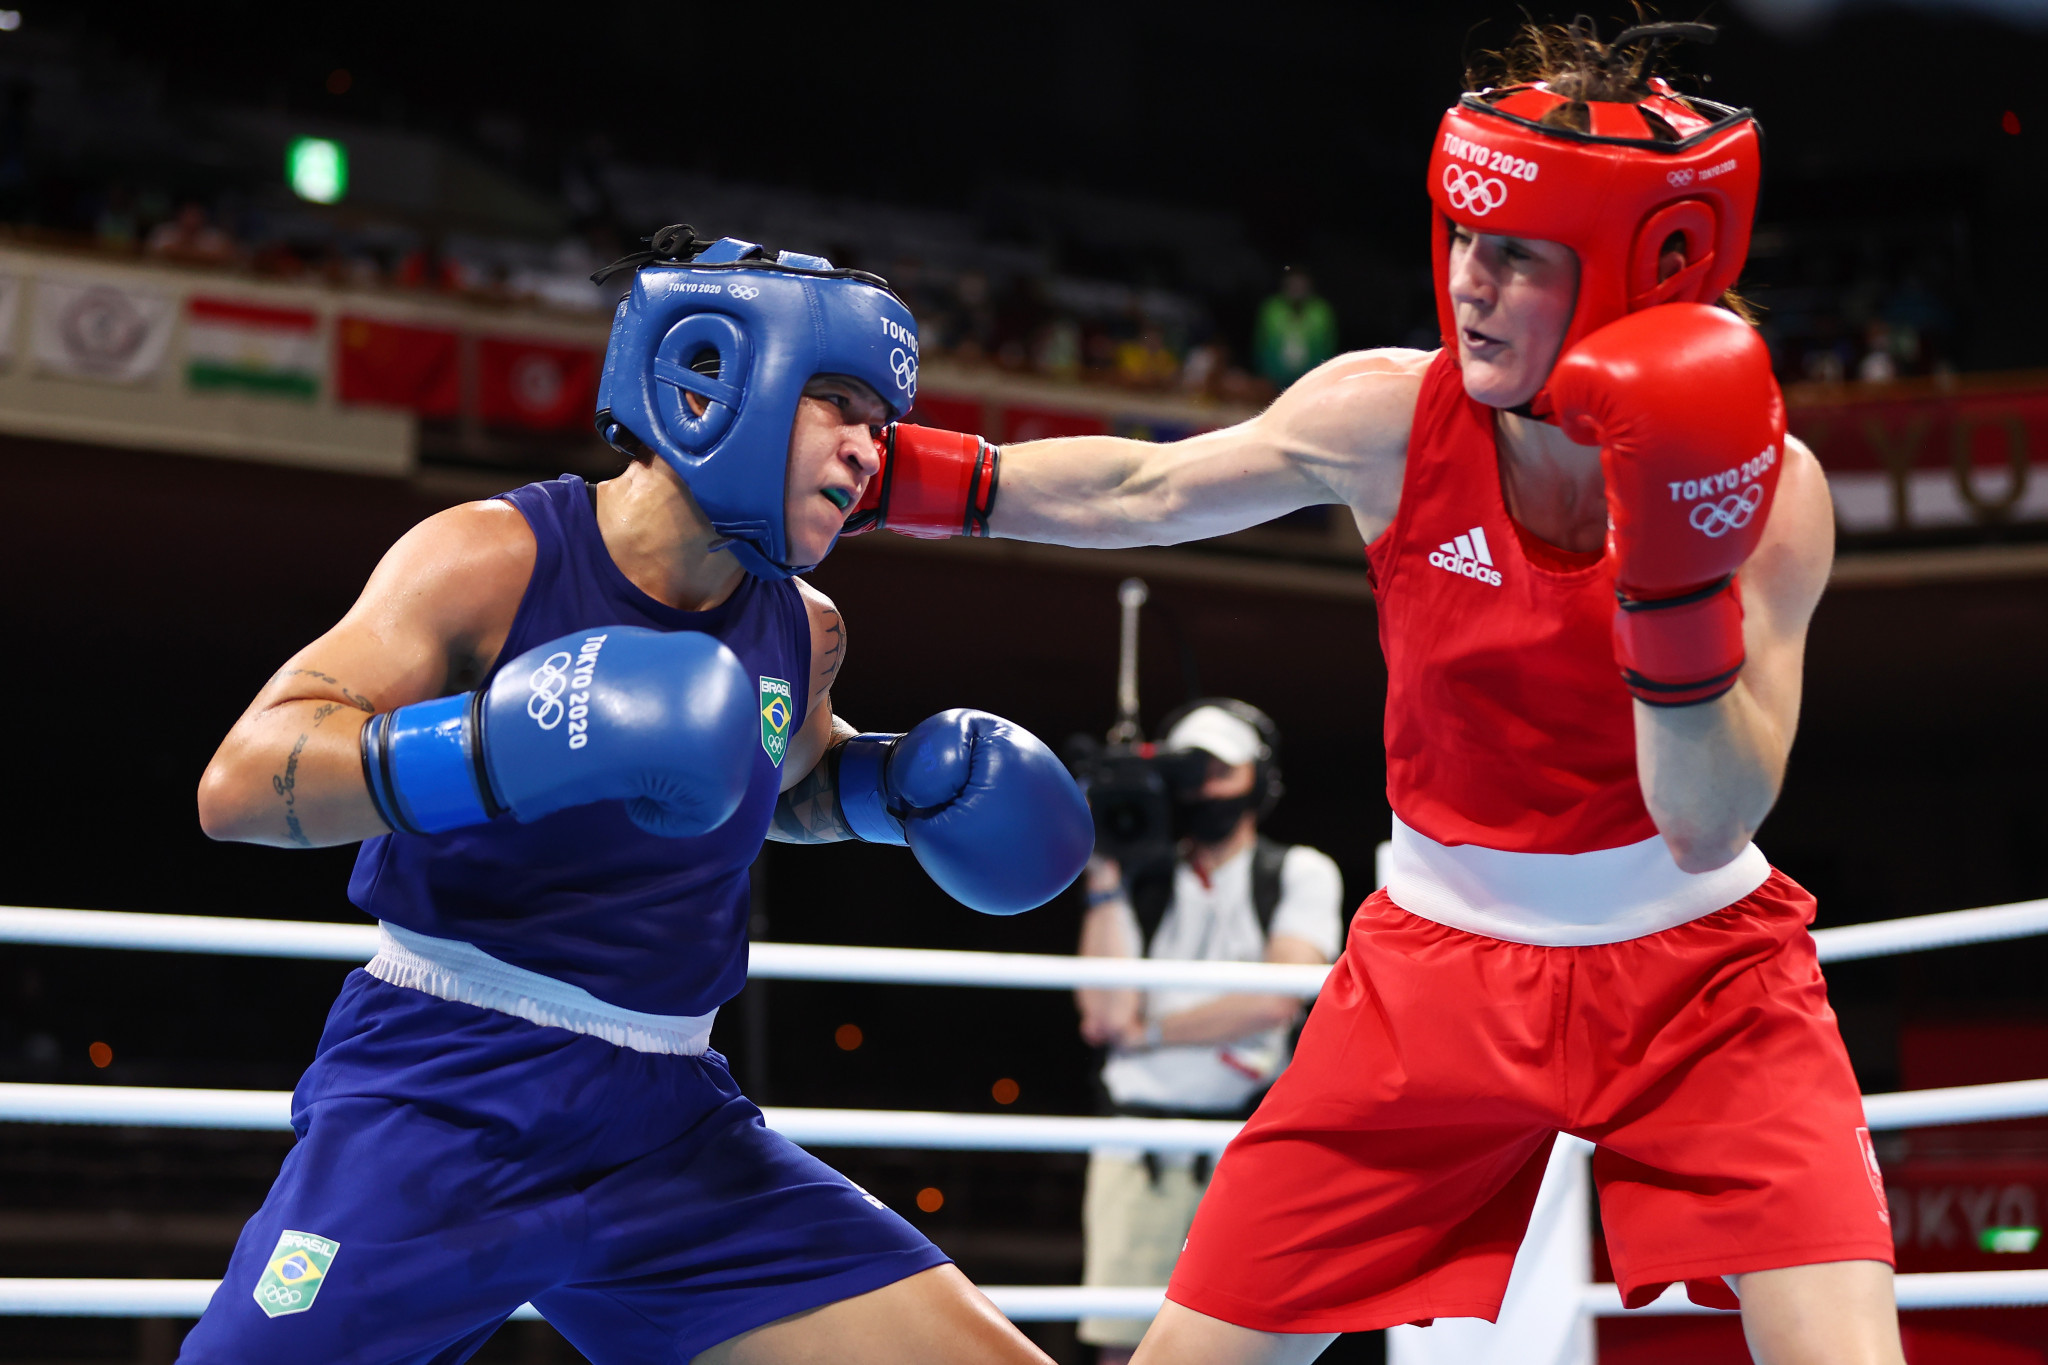 Boxing remains off the initial programme for Los Angeles 2028, and Umar Kremlev said yesterday 